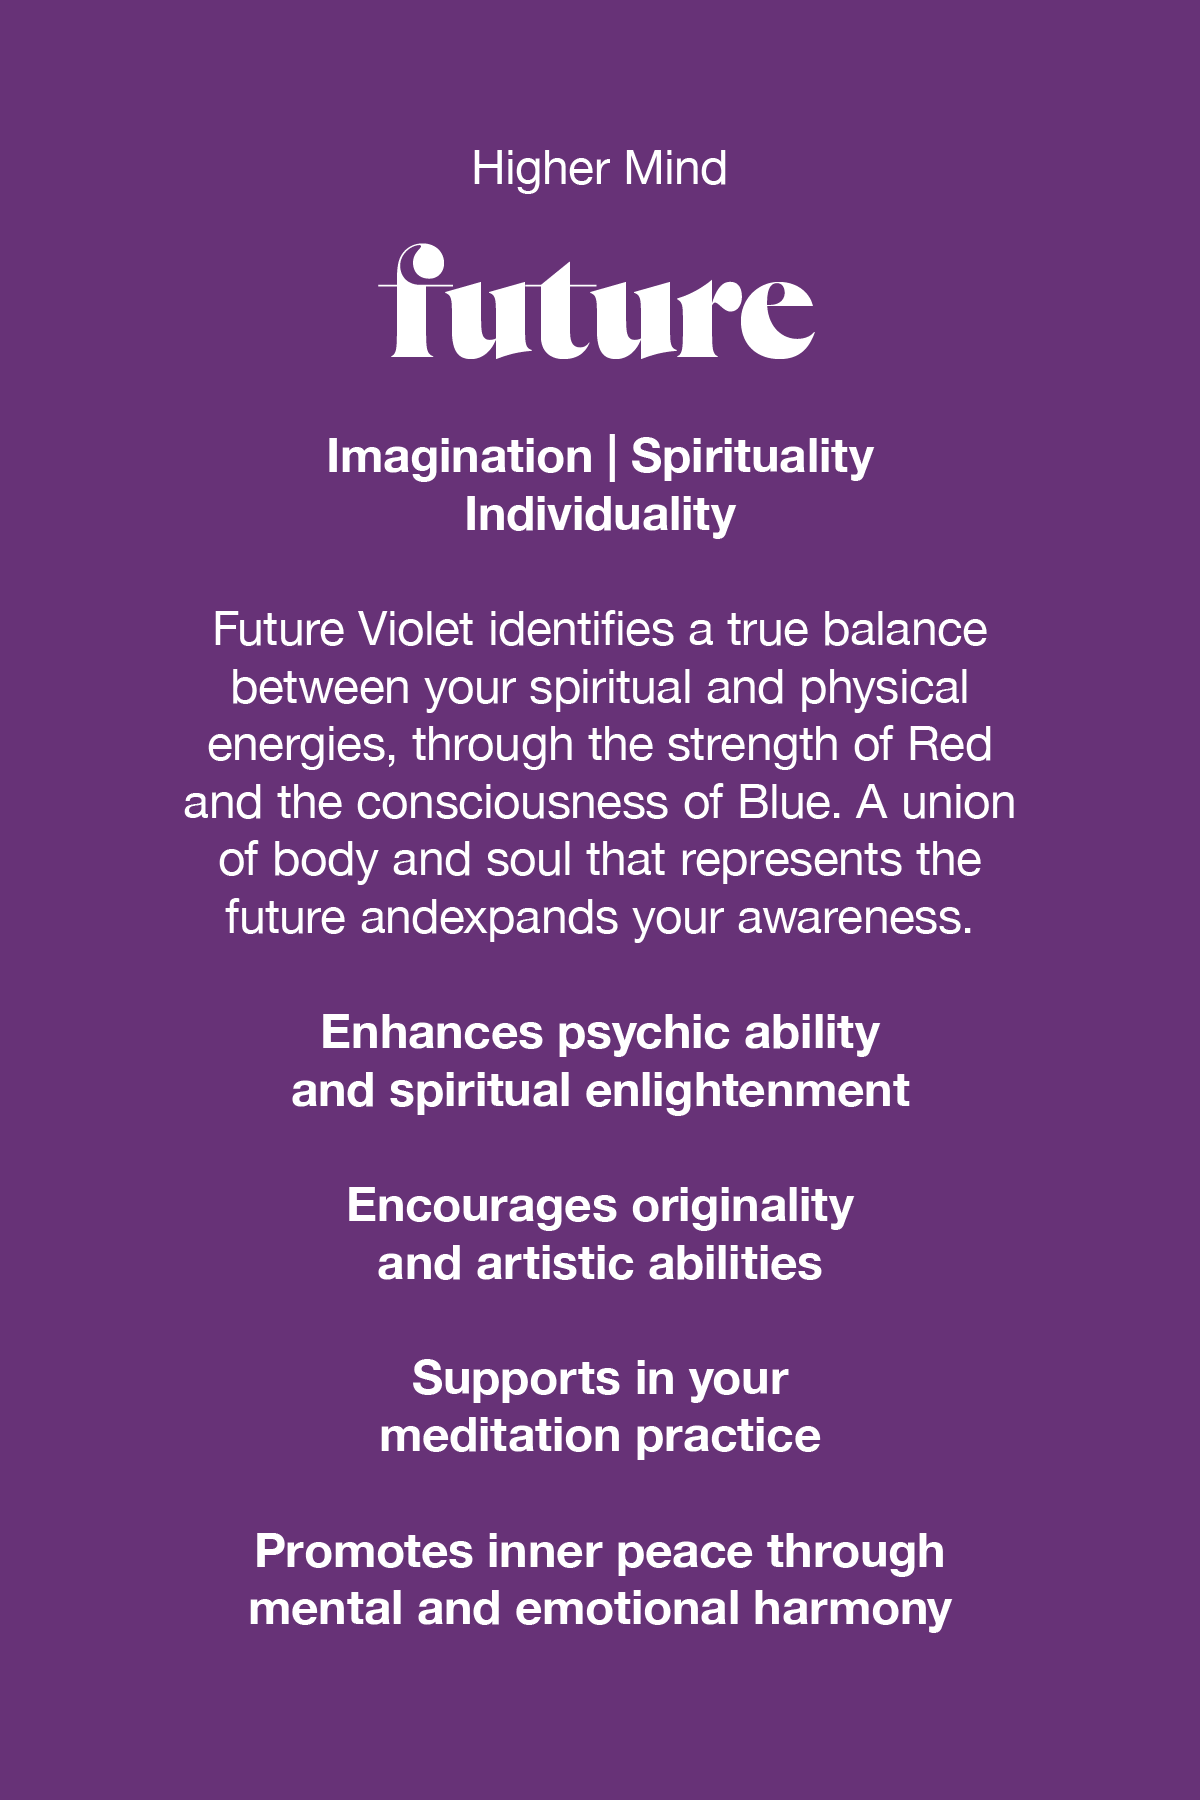 Future Violet identifies a true balance between your spiritual and physical energies, through the strength of red and the consciousness of blue. A union of body and soul that represents the future and expands your awareness. 